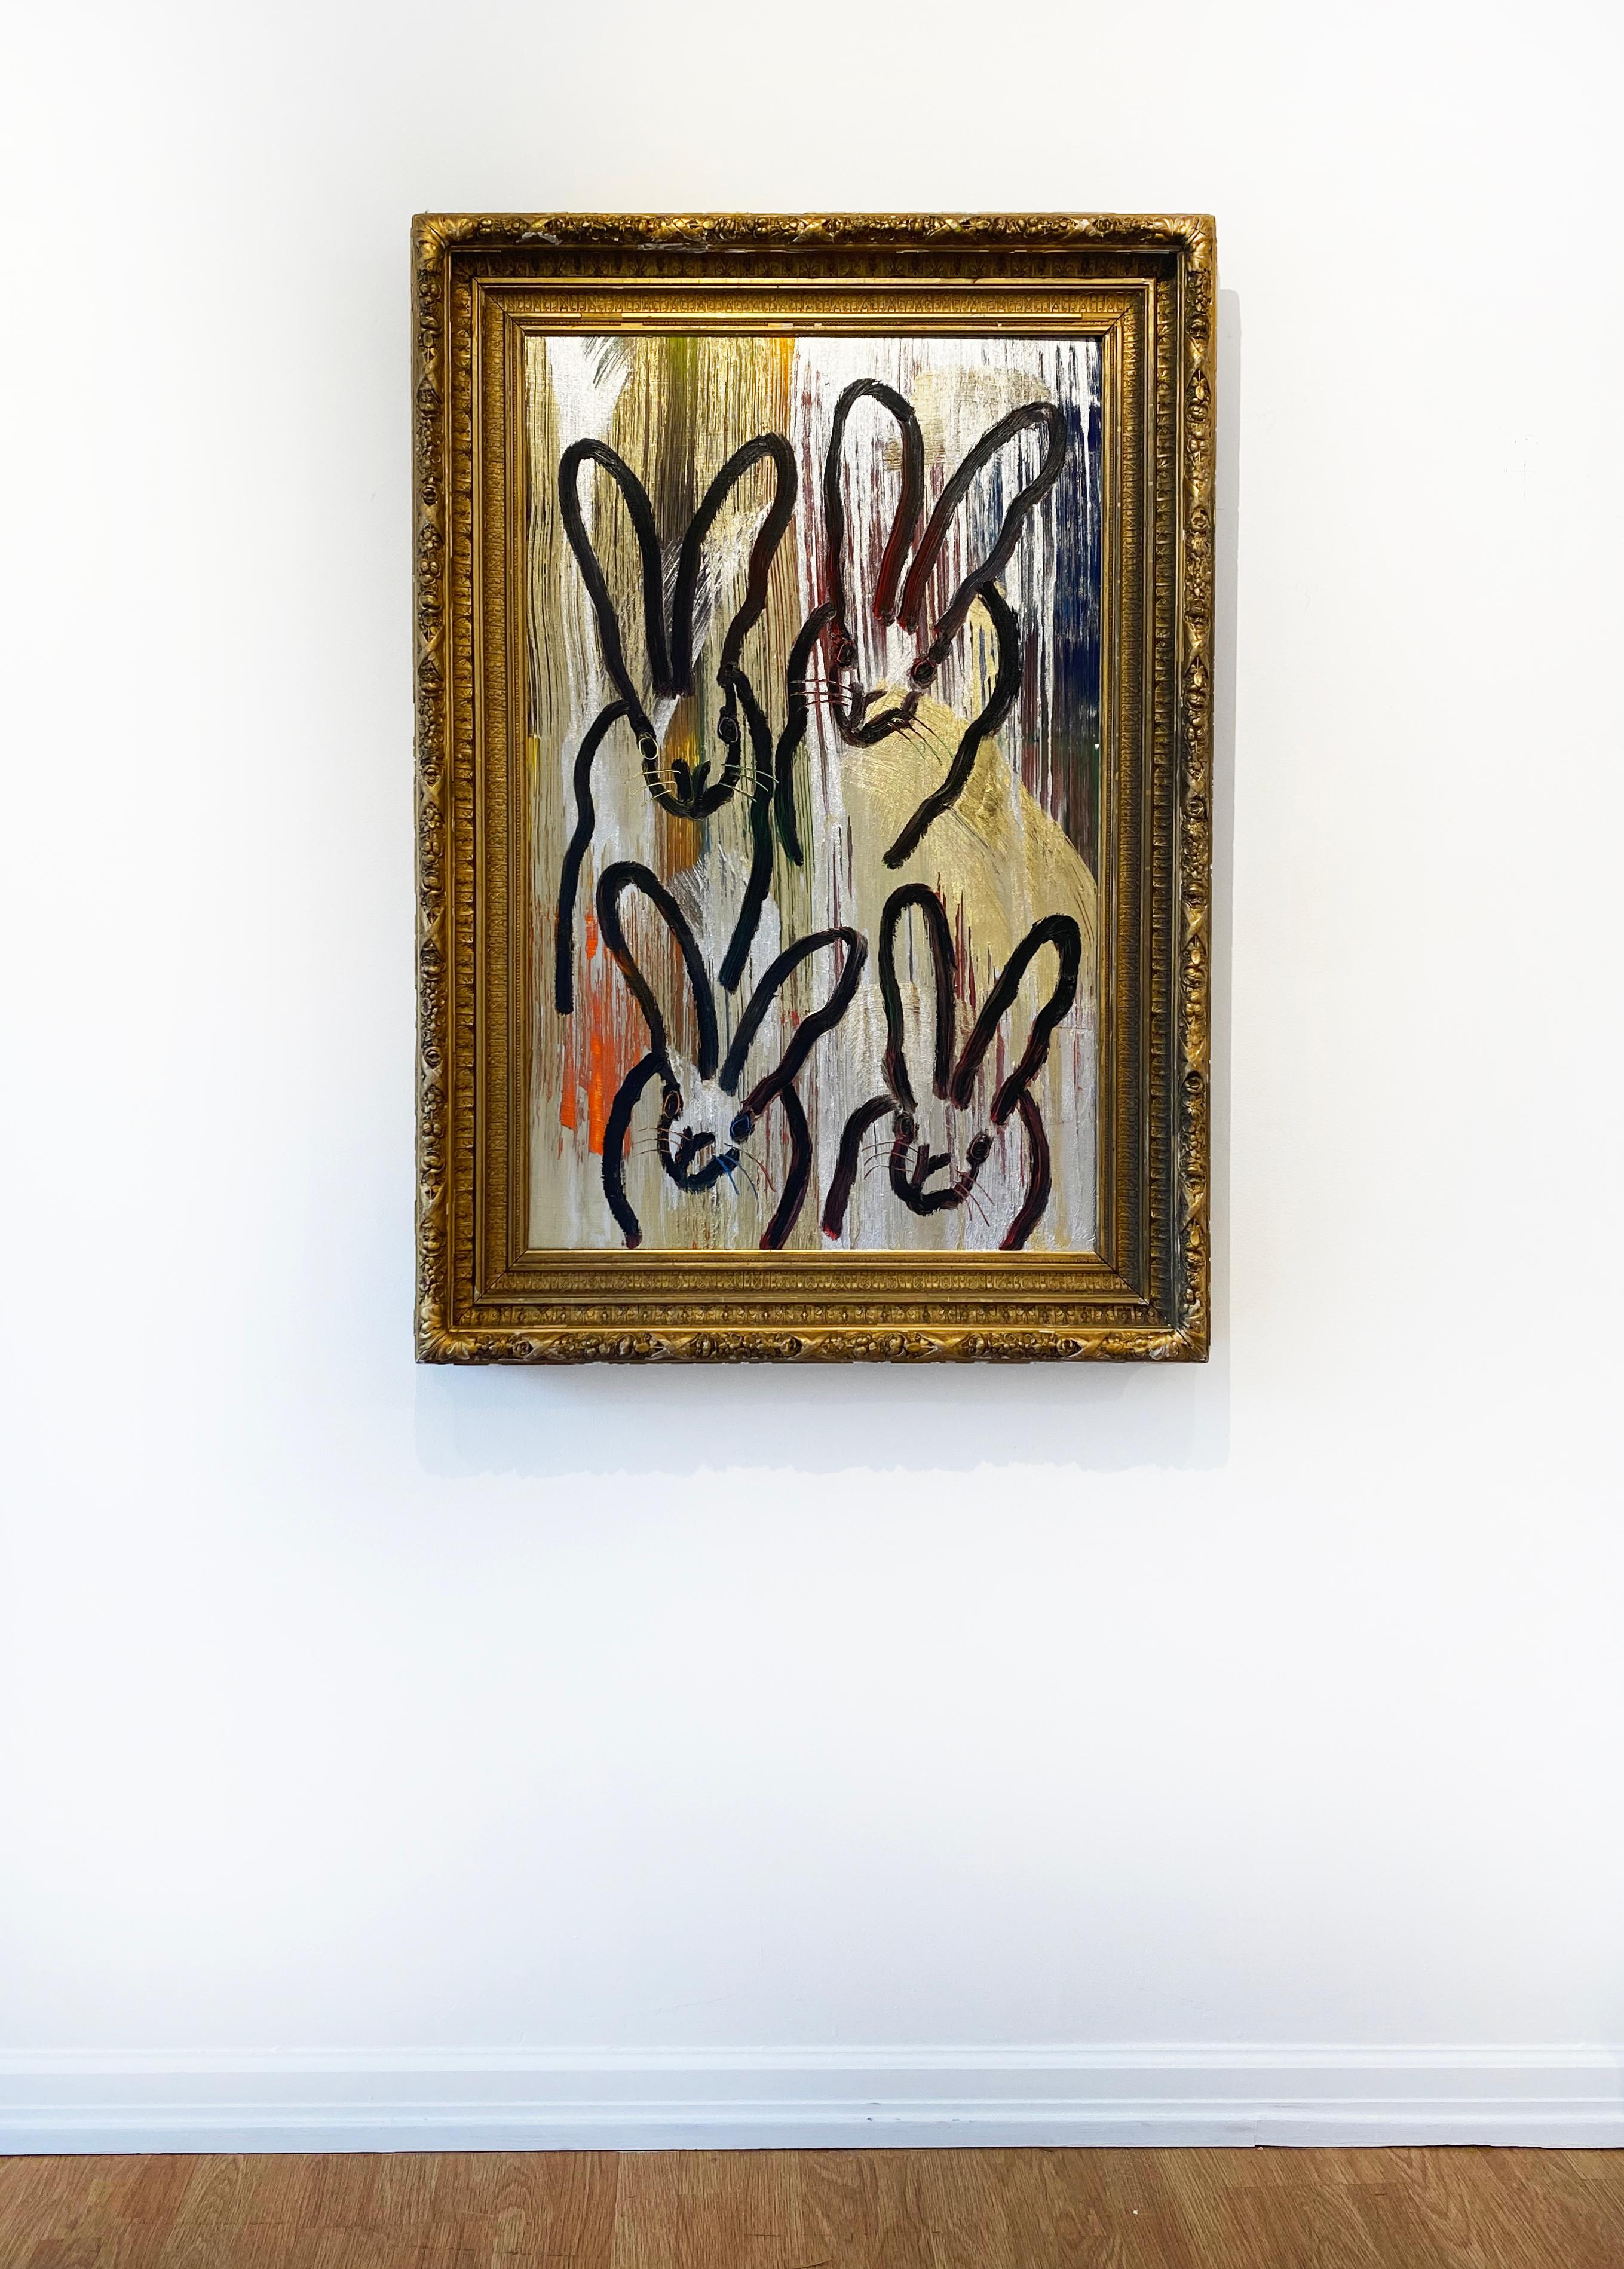 '4+' by Hunt Slonem, 2022. Oil on canvas, 39 x 25 in./ frame: 47.5 x 33.5 in. This painting features Slonem's signature bunnies outlined in black over strokes of gold, silver, red, blue, orange, and yellow. Framed in an antique, gold